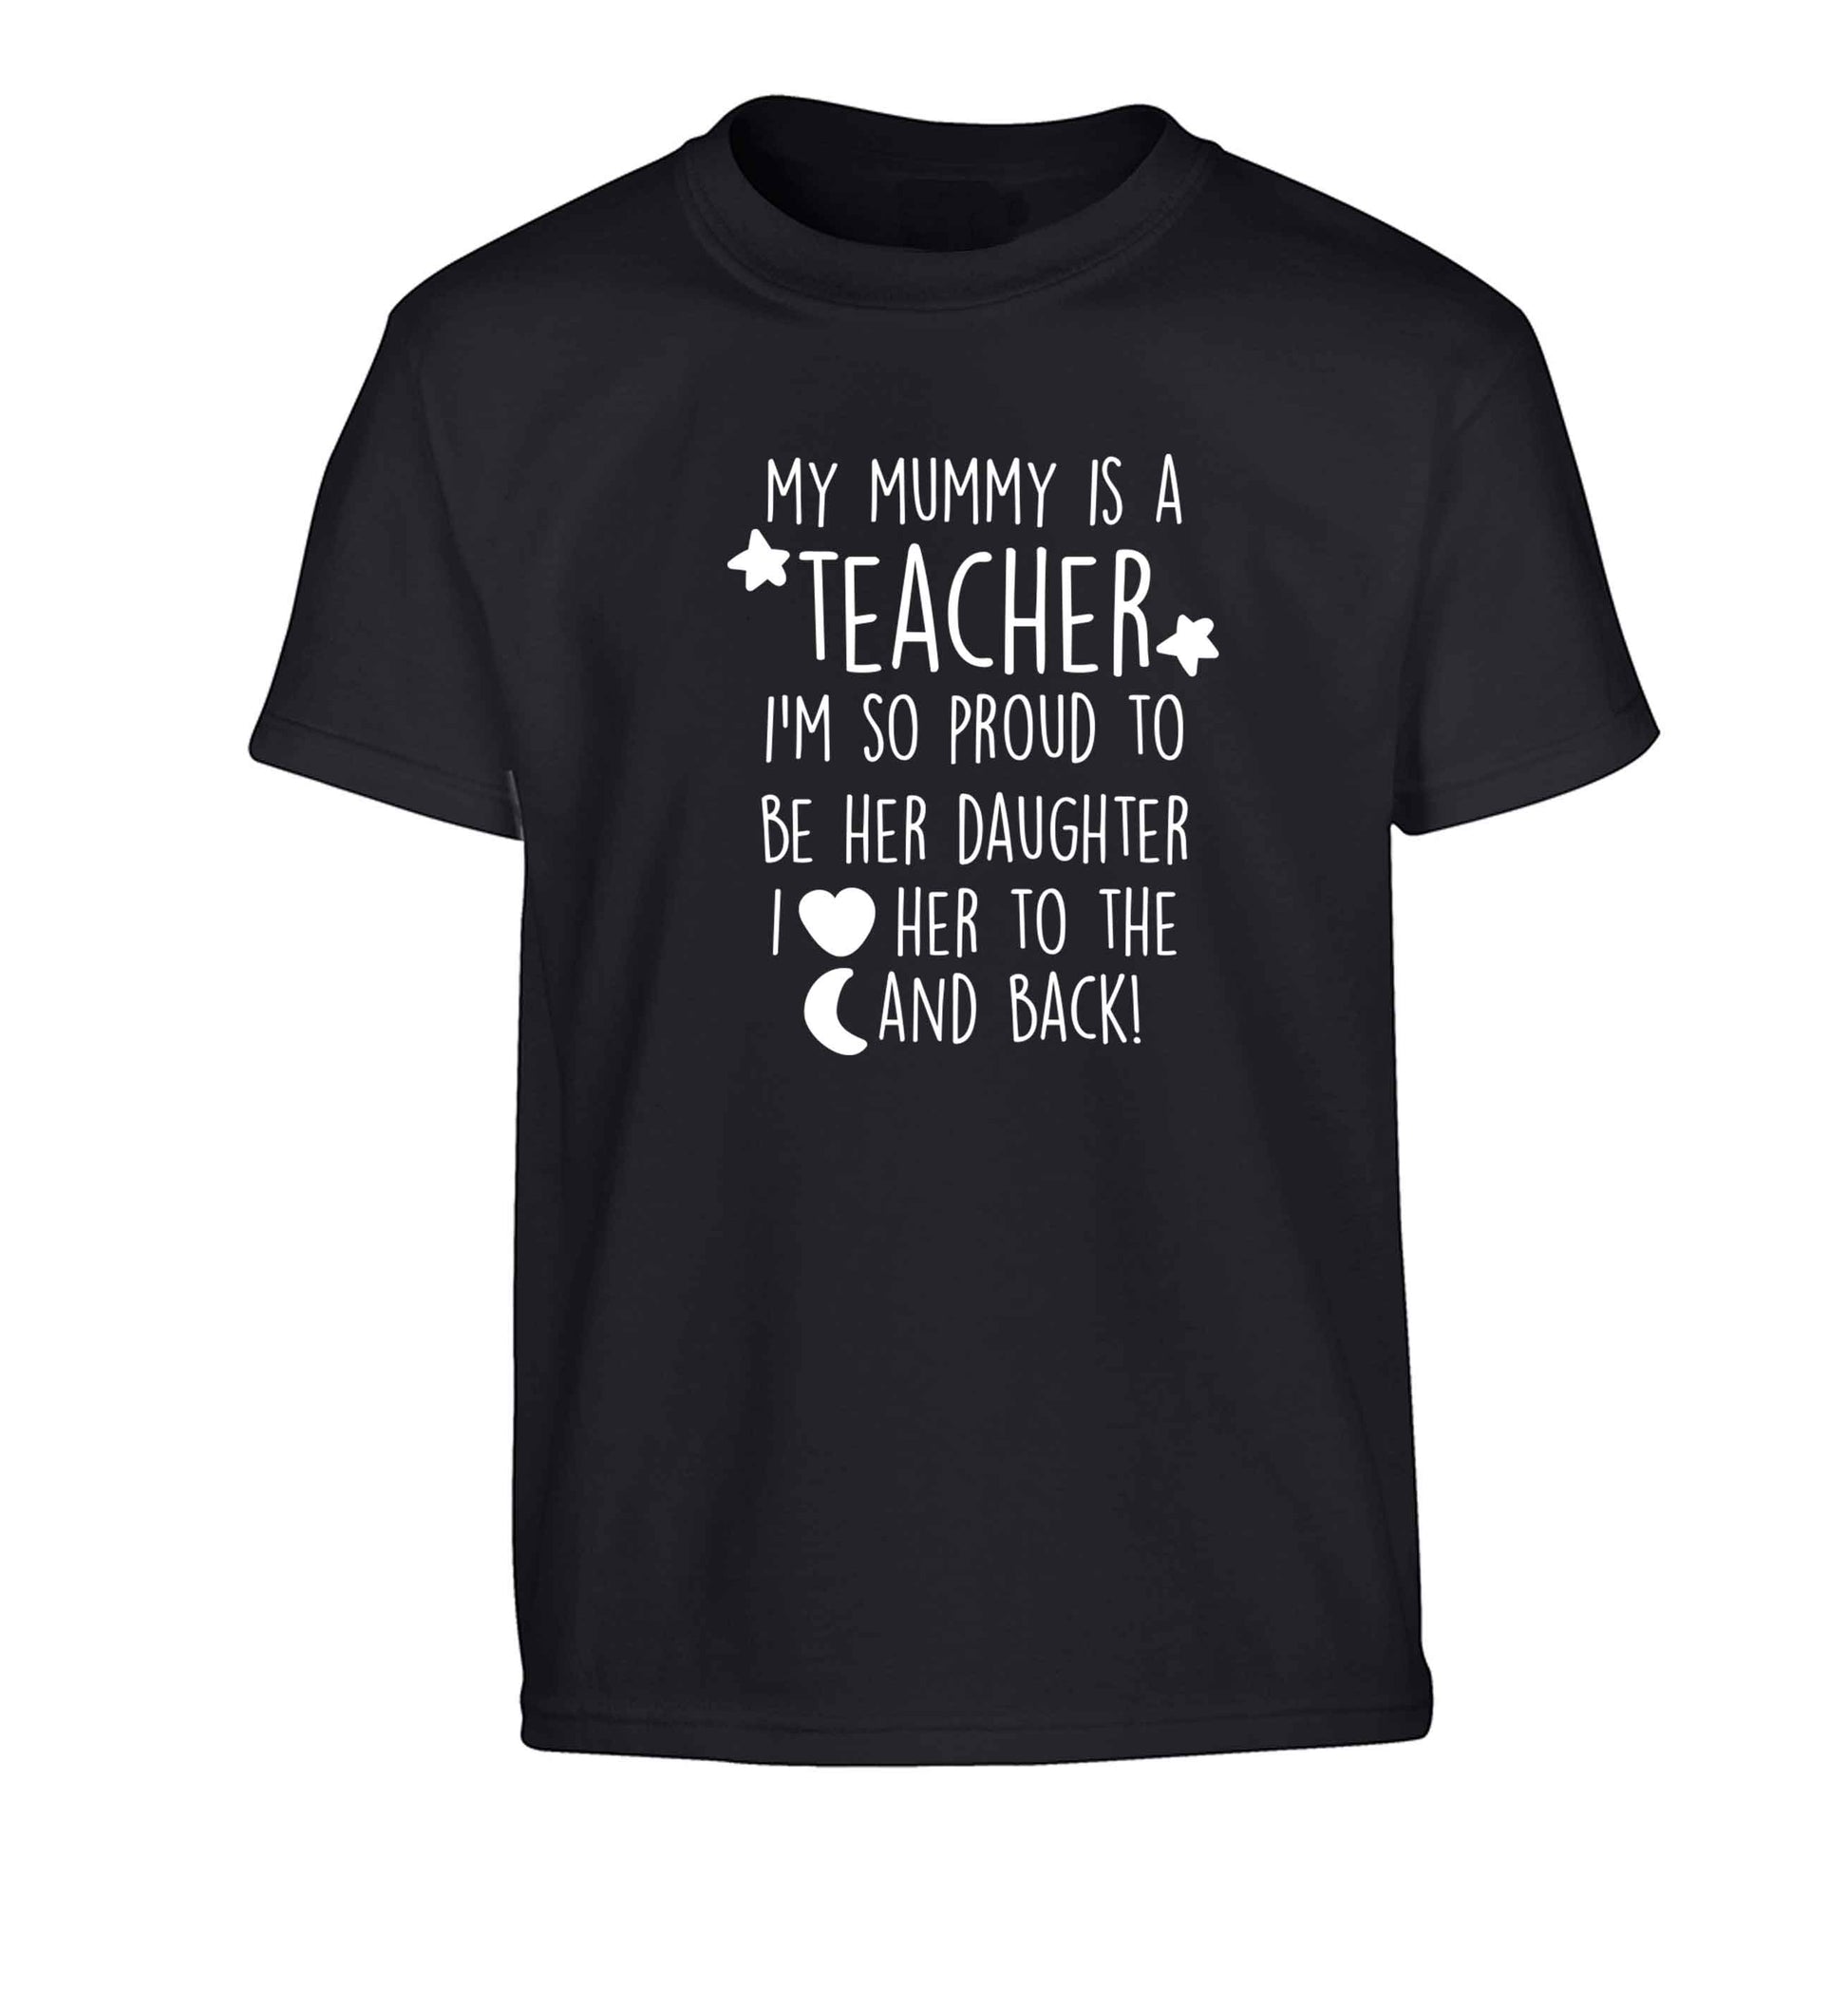 My mummy is a teacher I'm so proud to be her daughter I love her to the moon and back Children's black Tshirt 12-13 Years